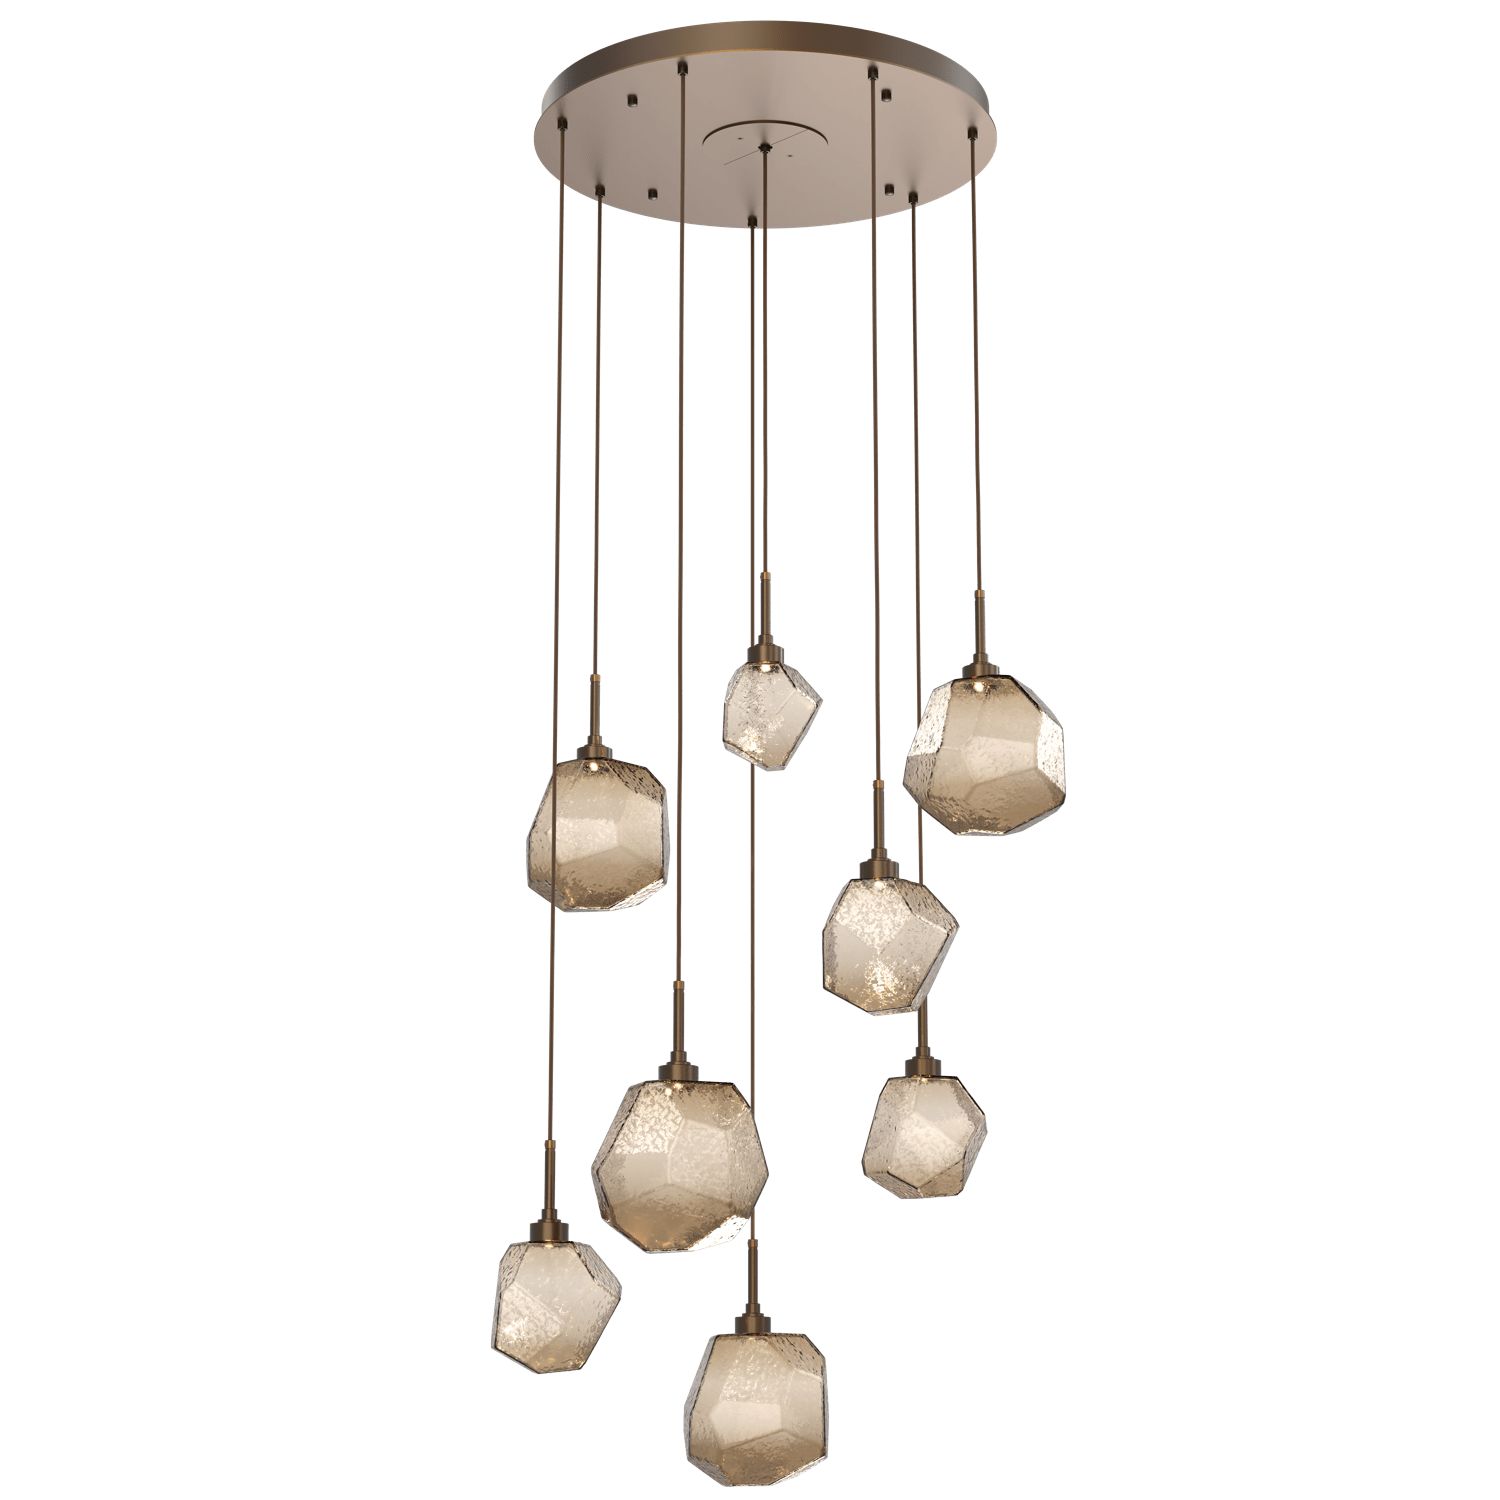 CHB0039-08-FB-B-Hammerton-Studio-Gem-8-light-round-pendant-chandelier-with-flat-bronze-finish-and-bronze-blown-glass-shades-and-LED-lamping